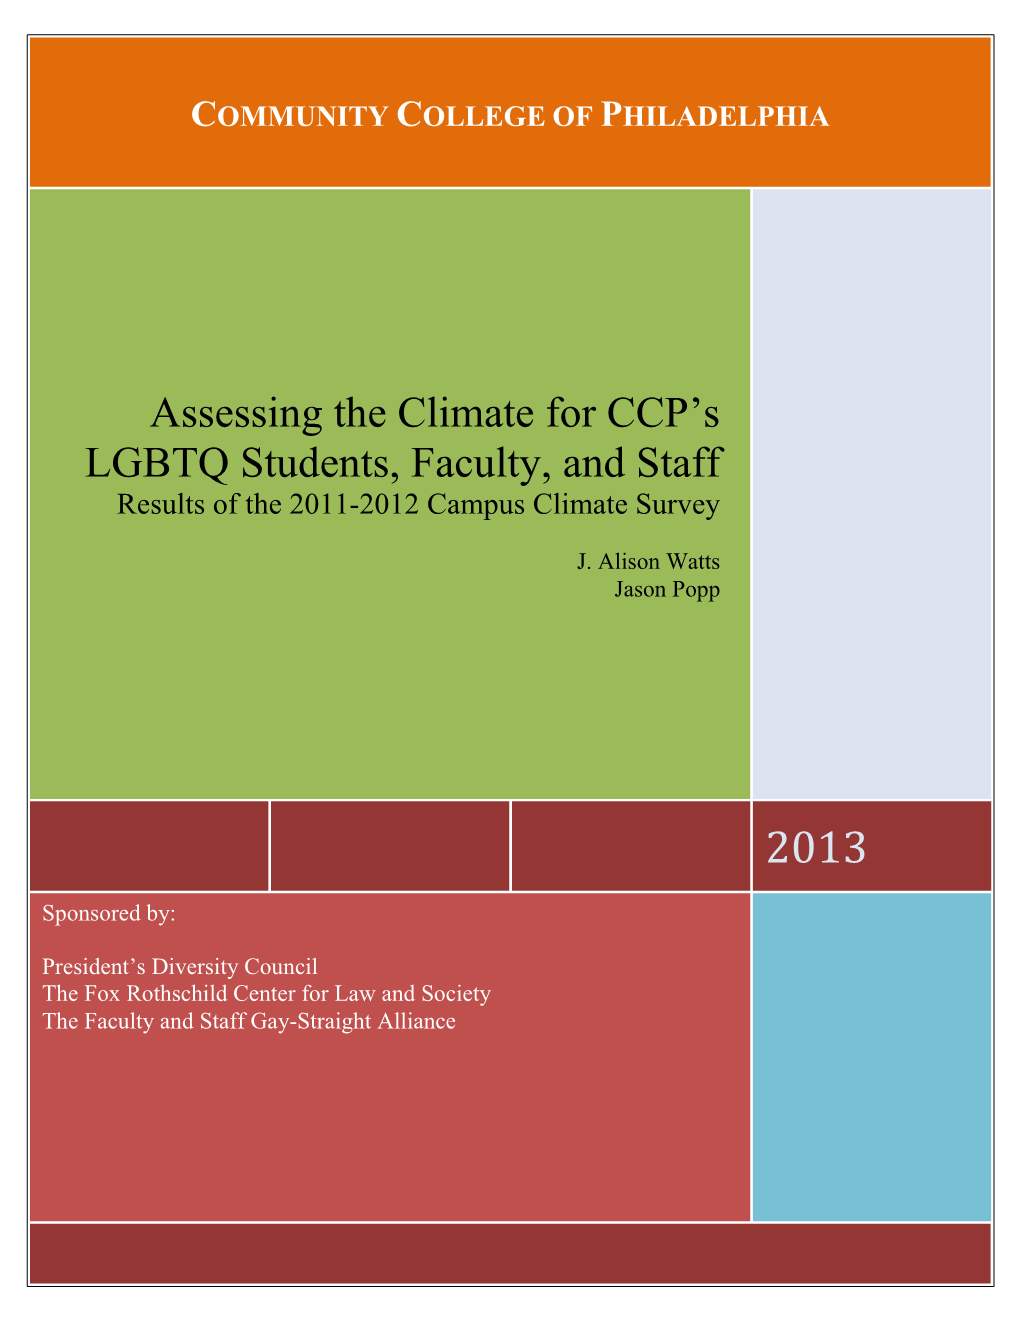 Assessing the Climate for CCP's LGBTQ Students, Faculty, and Staff